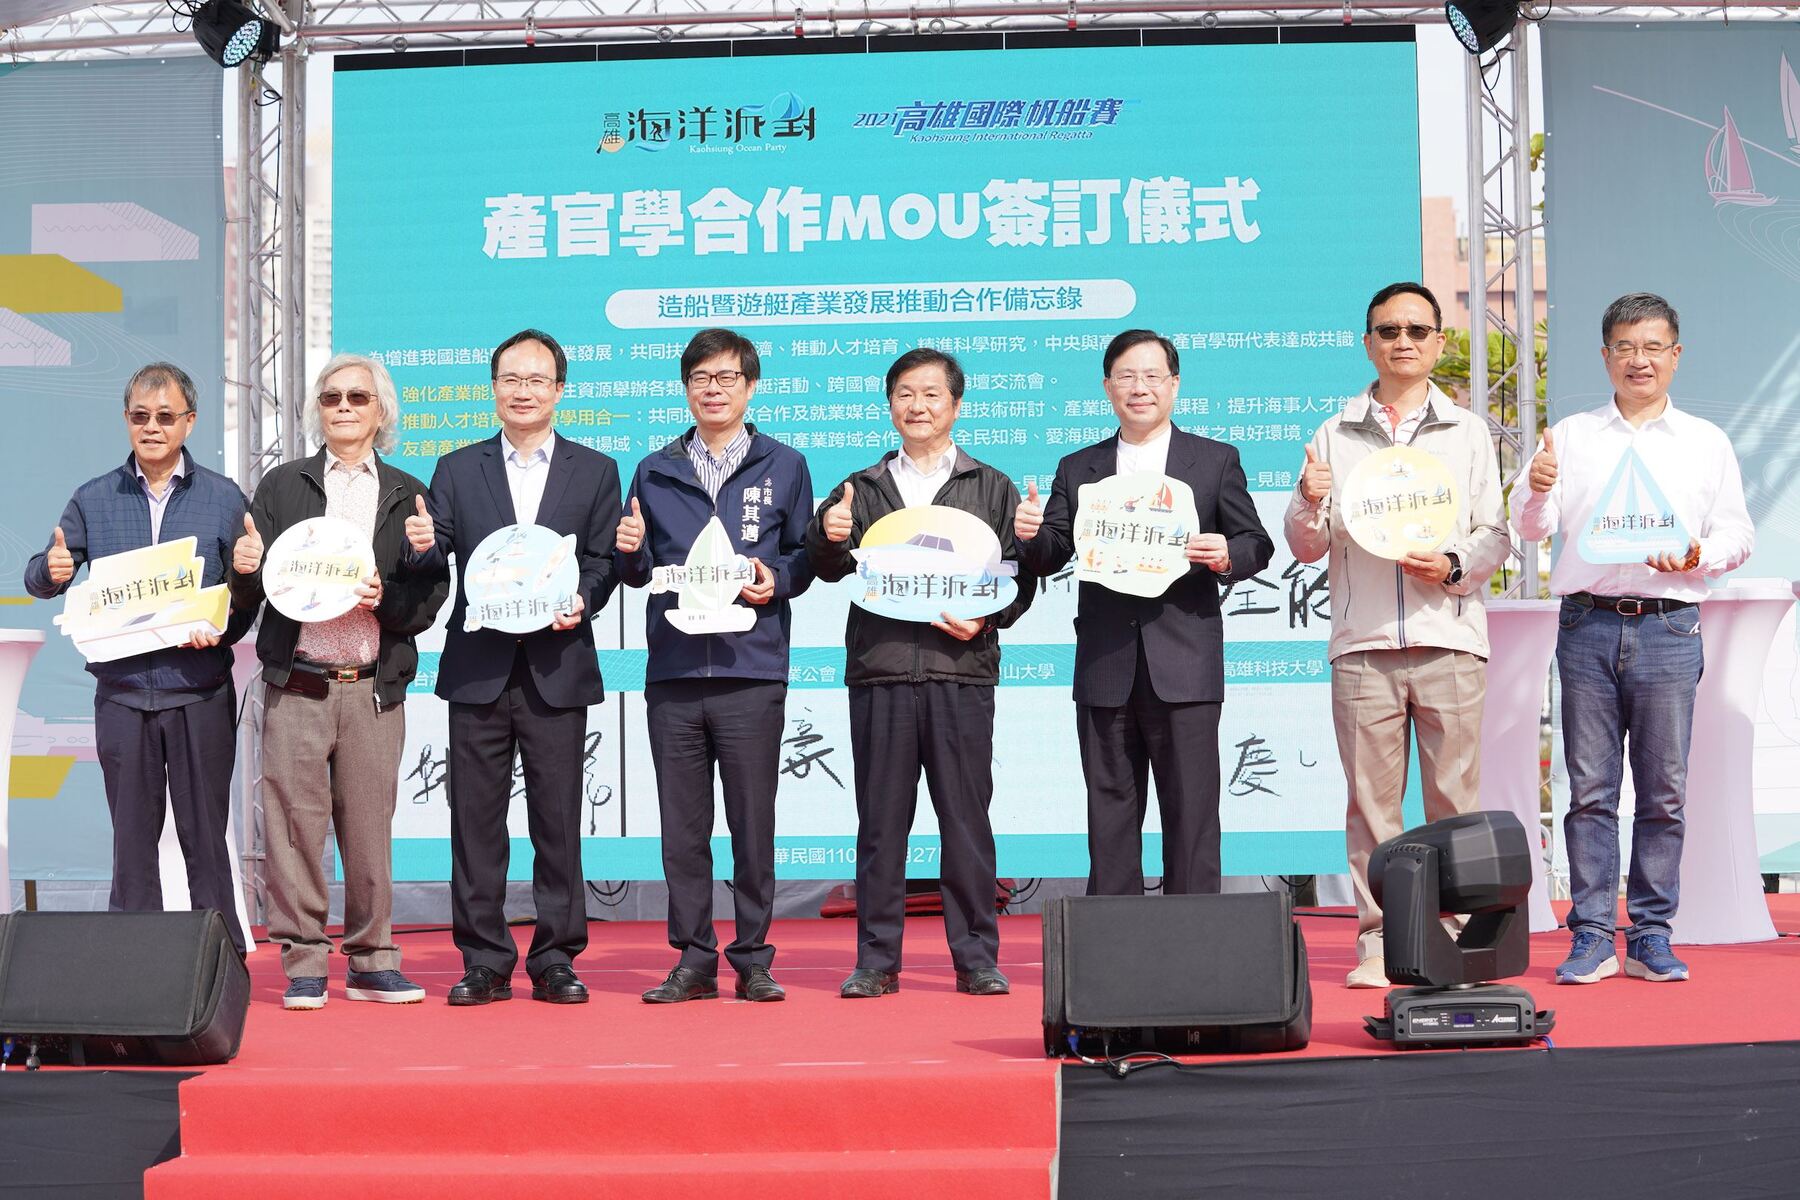 Mayor of Kaohsiung Chen Chih-Mai (fourth from the left), President of National Sun Yat-sen University Ying-Yao Cheng (first from the left), with representatives of the industry, government, and academia, signed an MOU on cooperation in shipbuilding and yacht industry and will jointly promote the development of the marine industry. (Photo provided by Kaohsiung City Government)